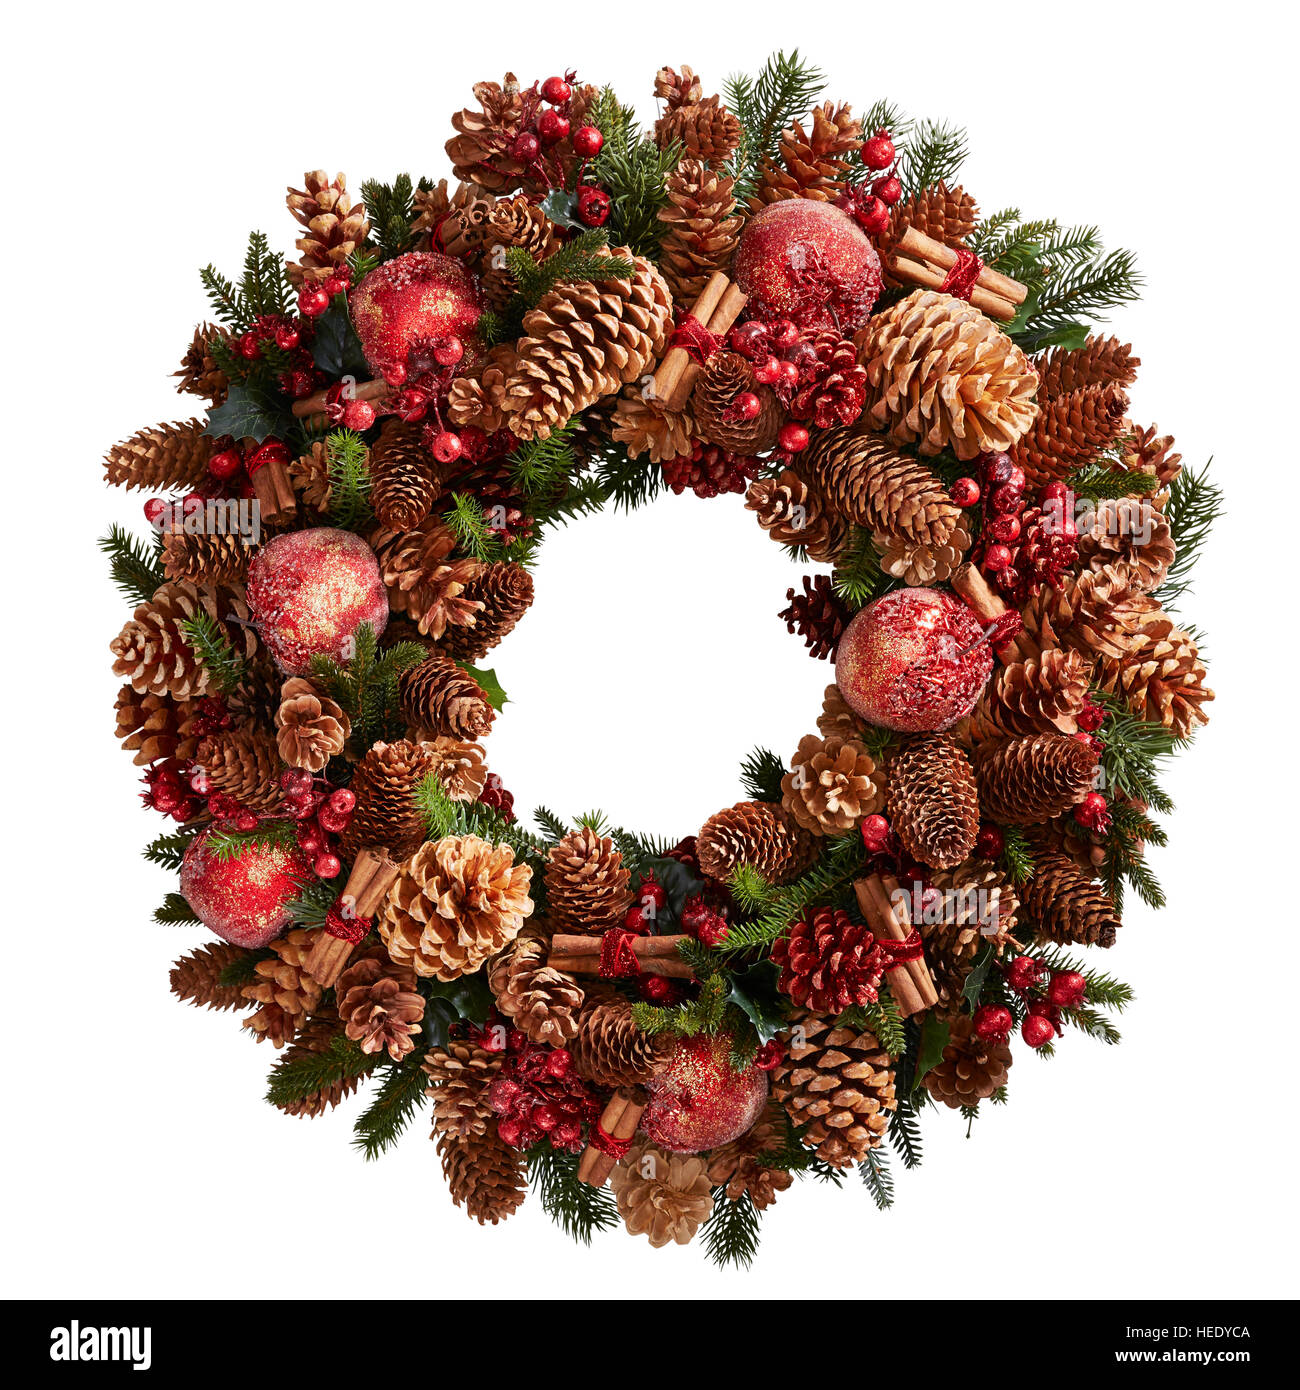 Christmas wreath decoration cut out festive door stylish traditional circular round traditional festive Stock Photo